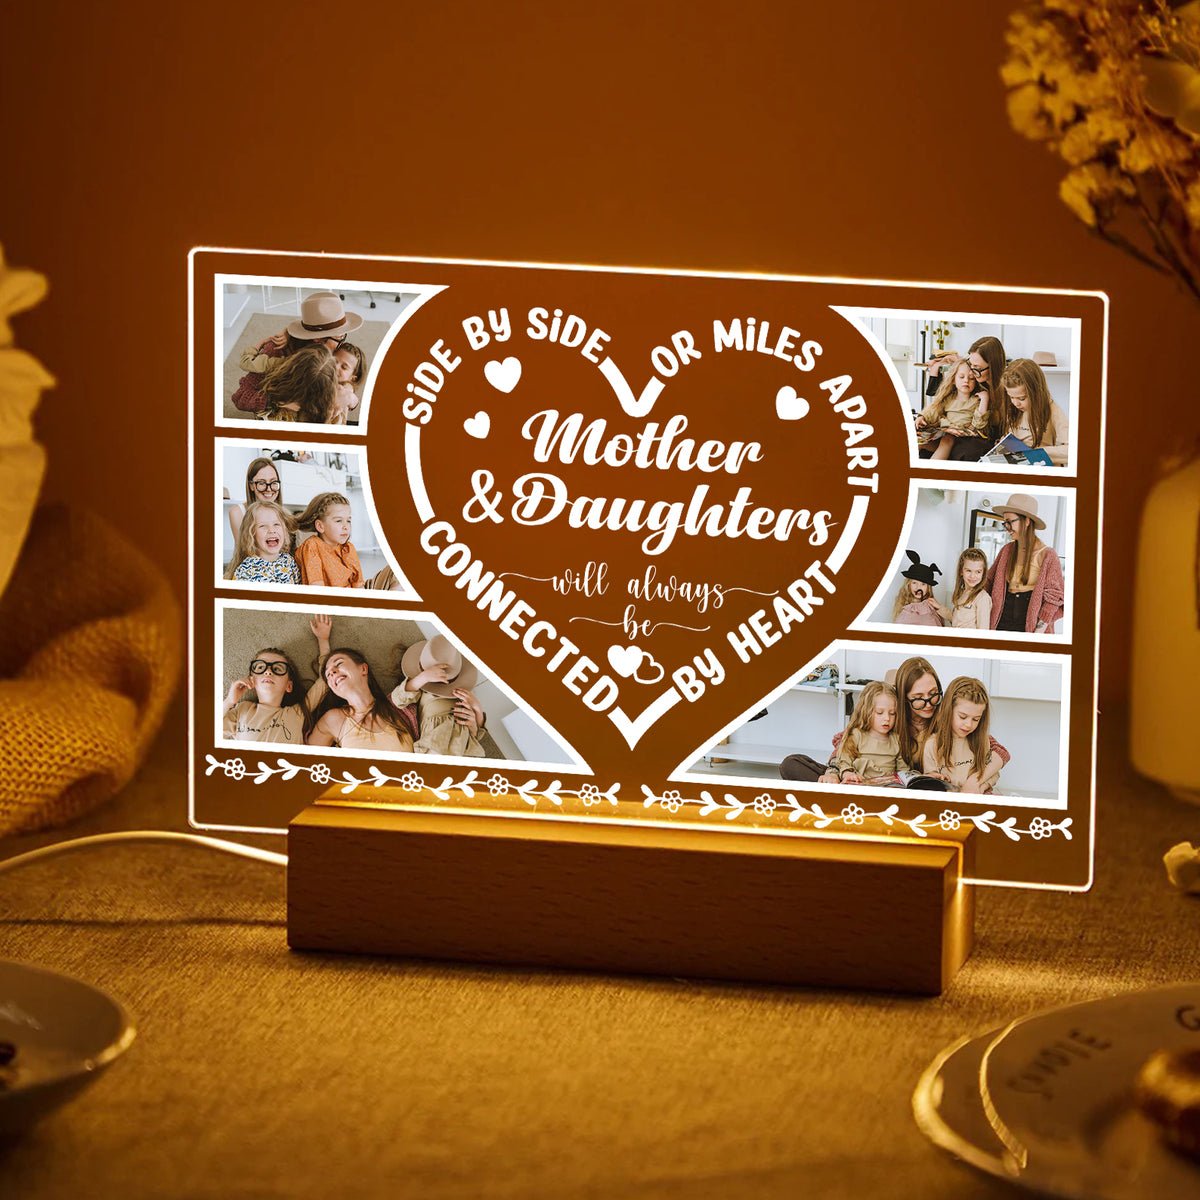 Magic mirror LED light photo frame,best personalized gift for valentines  day,anniversary,birthday, home & other purpose